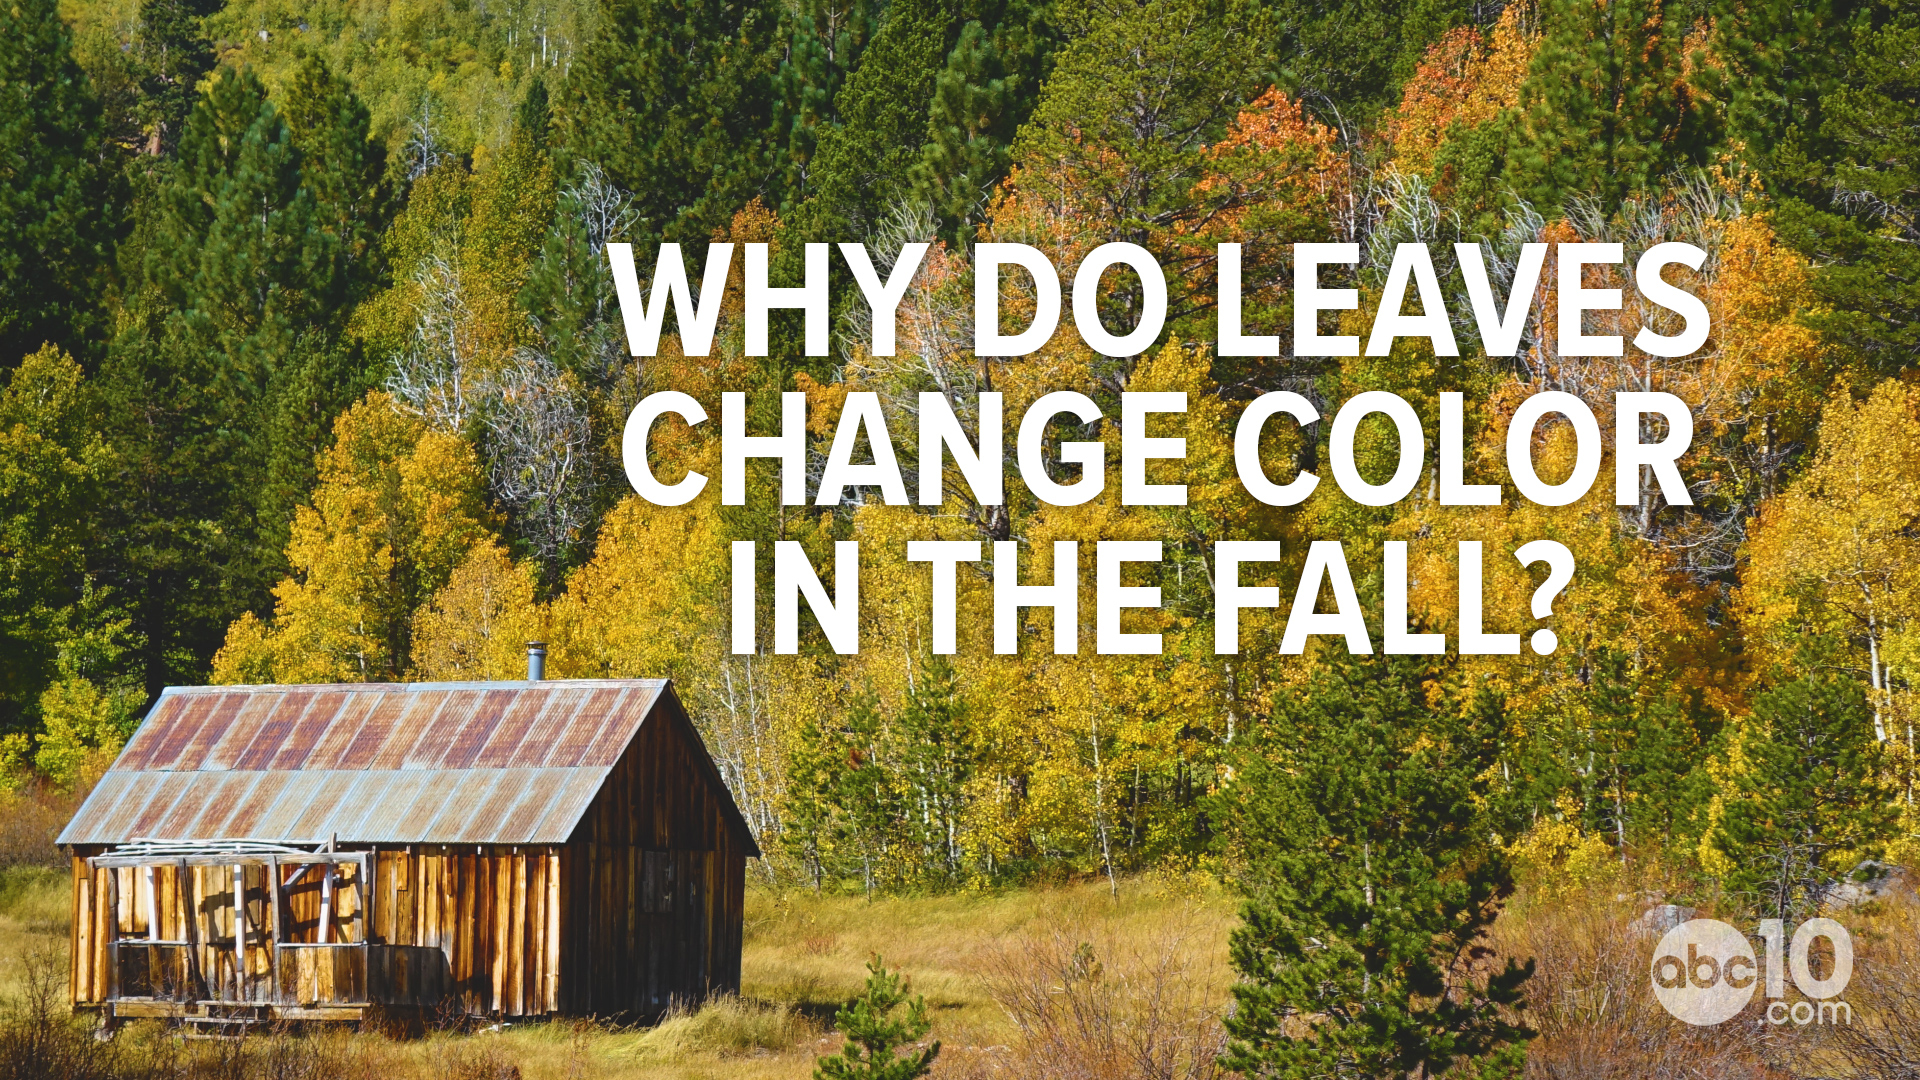 It happens every fall. Leaves on the trees turn shades of yellow, red, brown, & orange before falling to the ground. Here's why the leaves change color in the fall.